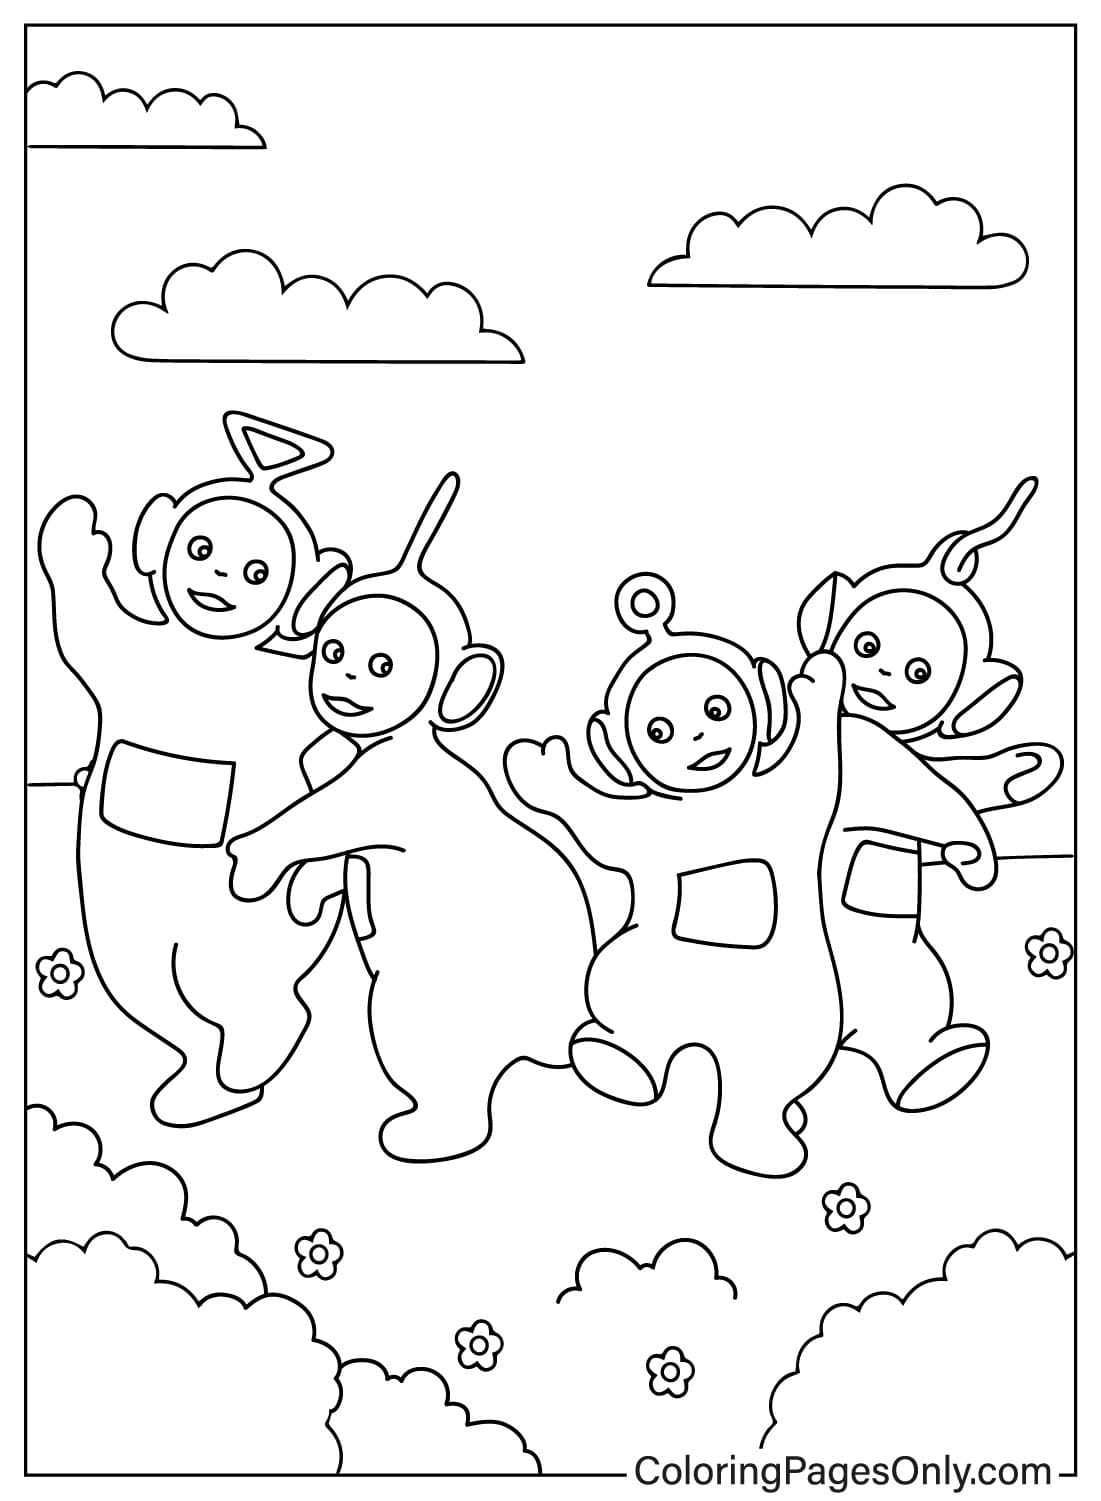 Teletubbies – WildBrain Coloring Page Free from Teletubbies - WildBrain